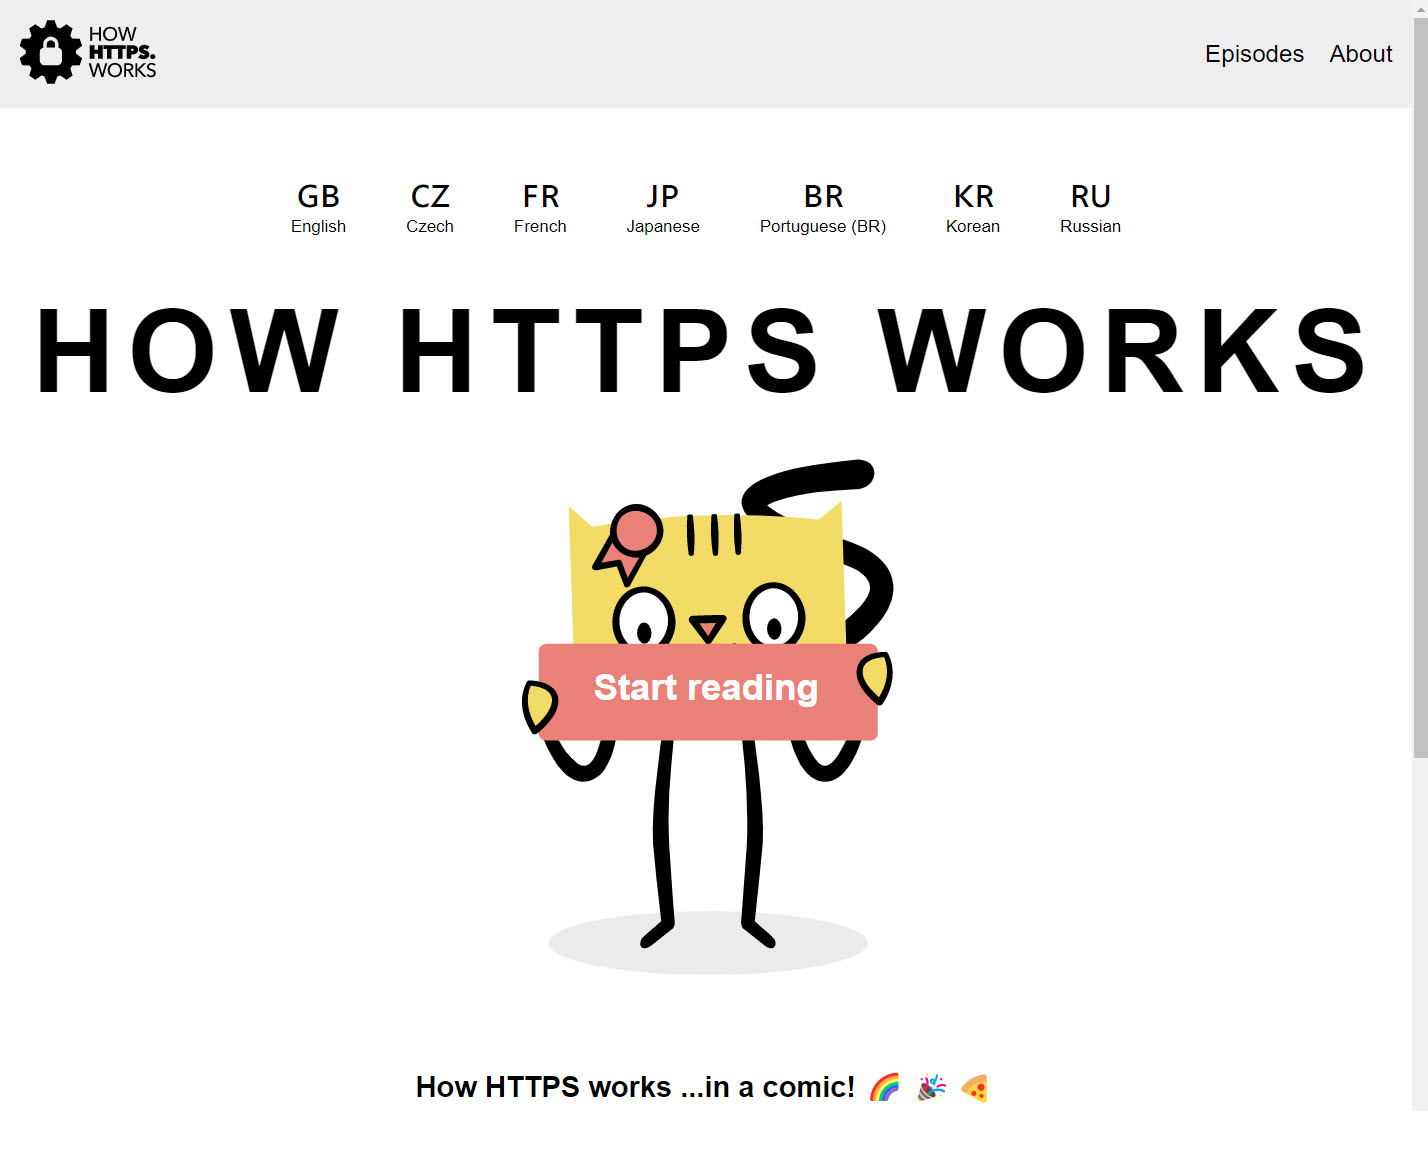 HOW HTTPS WORKS